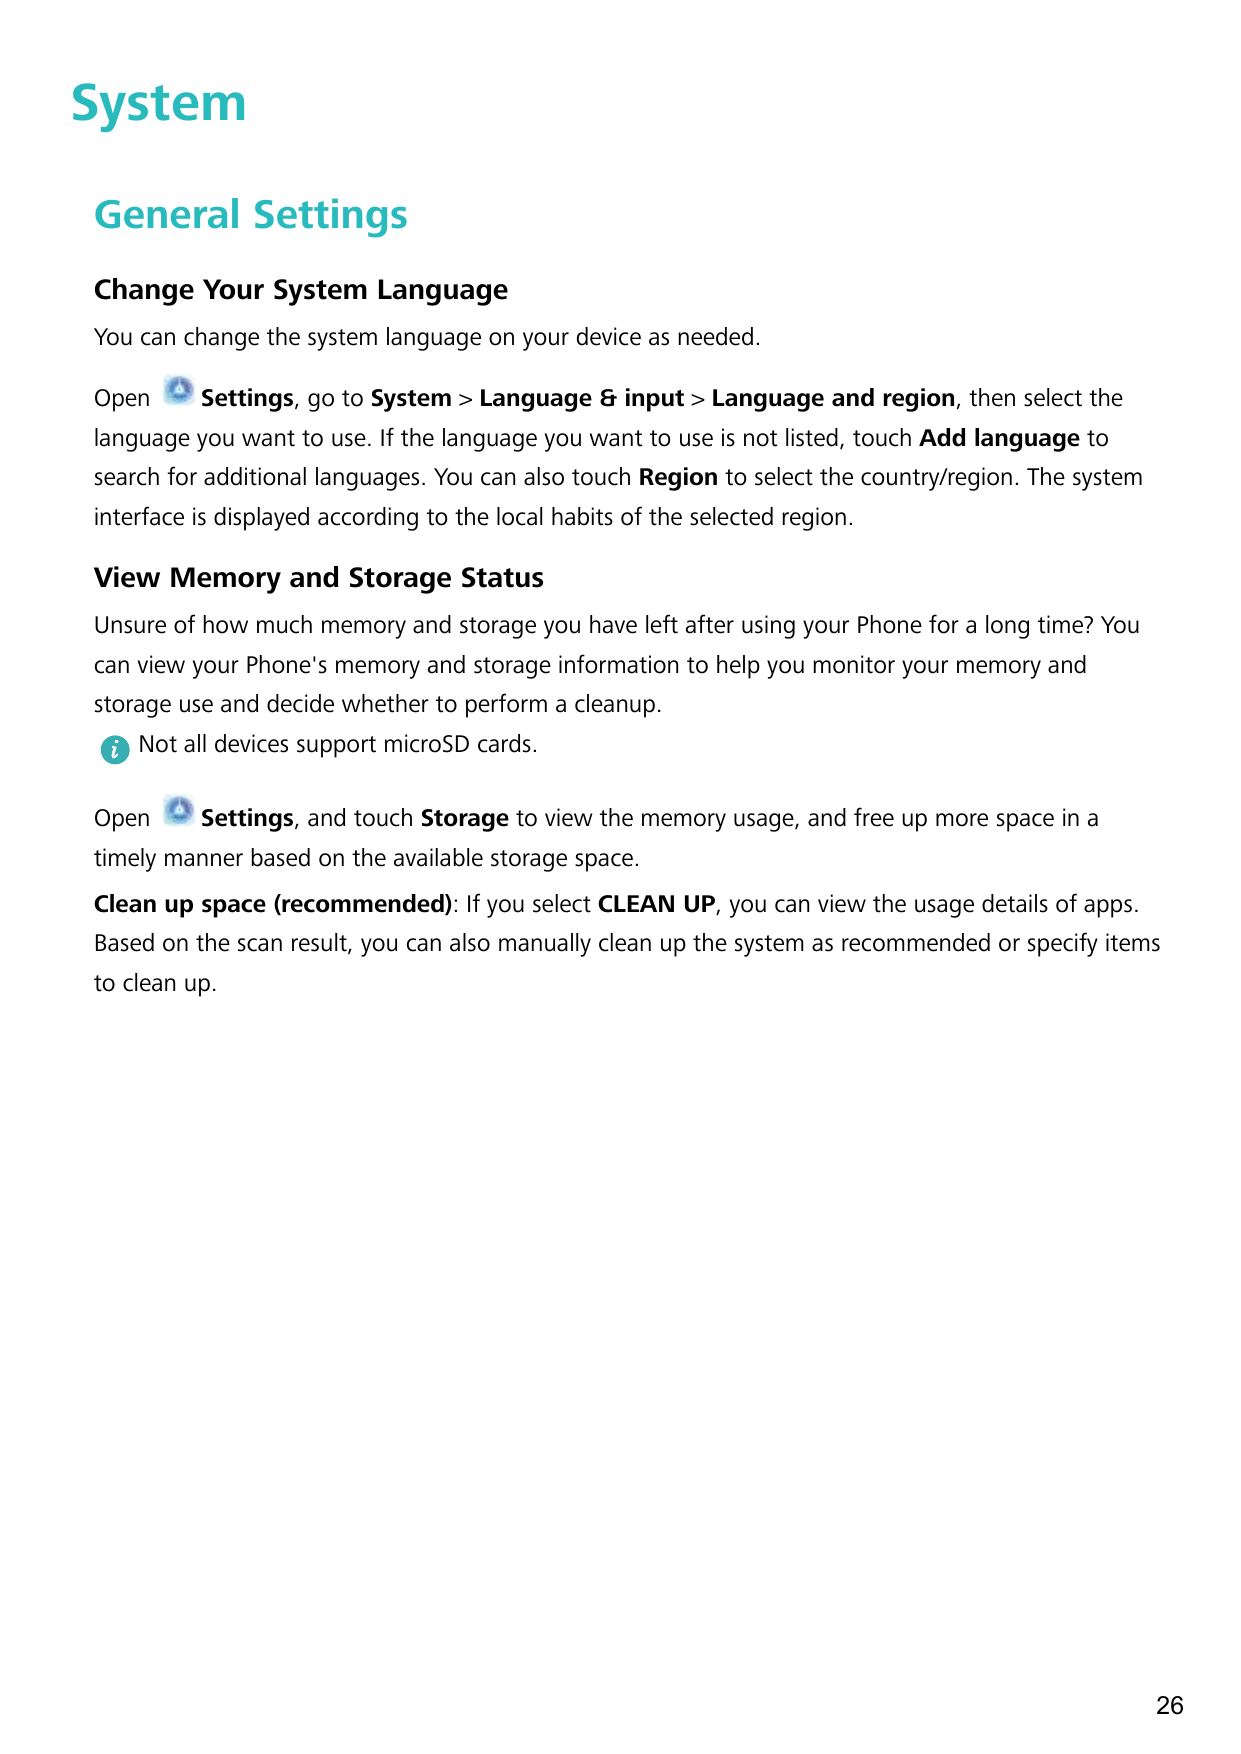 SystemGeneral SettingsChange Your System LanguageYou can change the system language on your device as needed.OpenSettings, go to